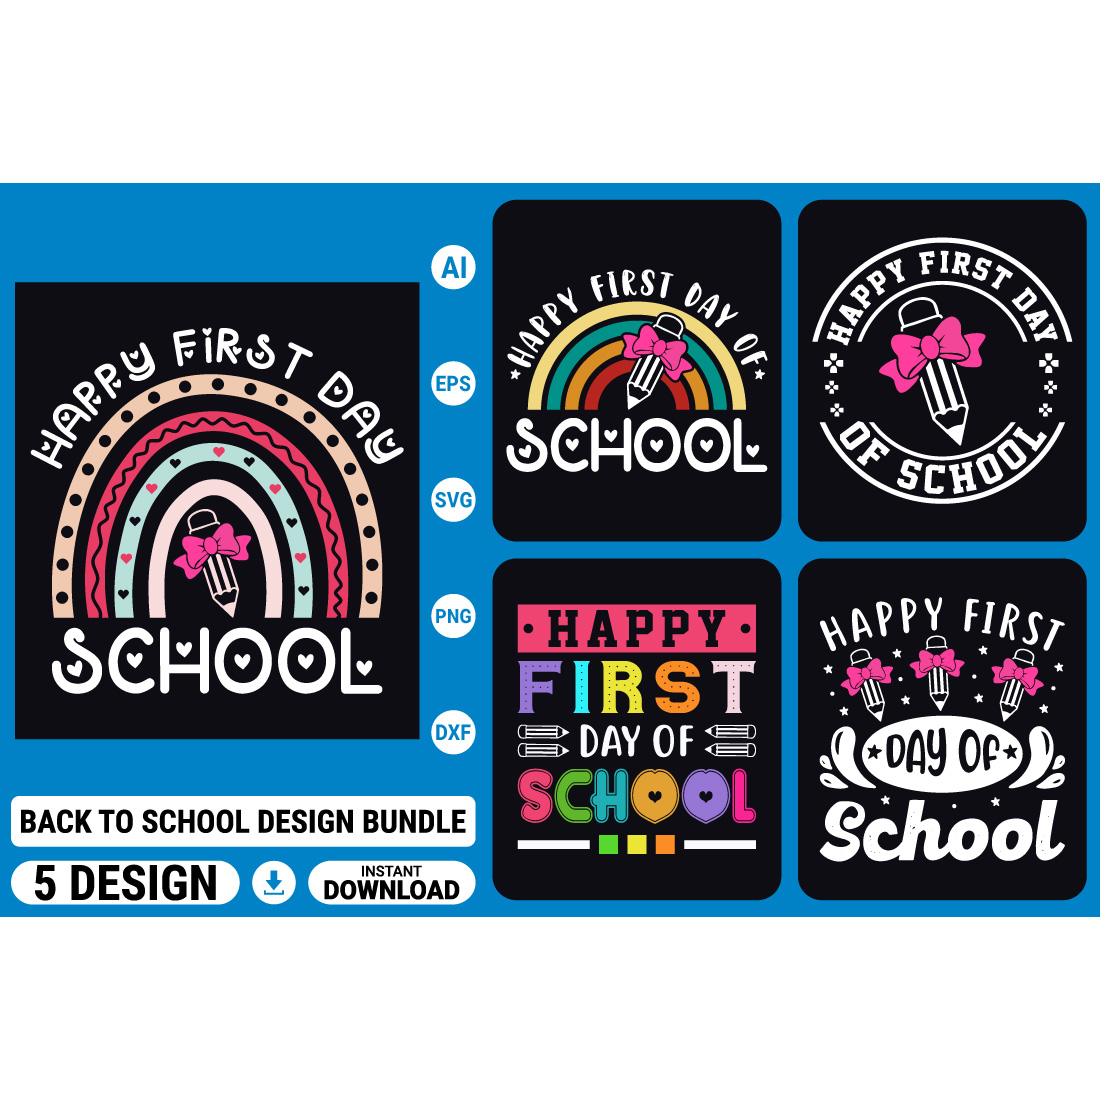 Back to school t-shirt design bundle, first day, hundred days of school, typography t-shirts cover image.